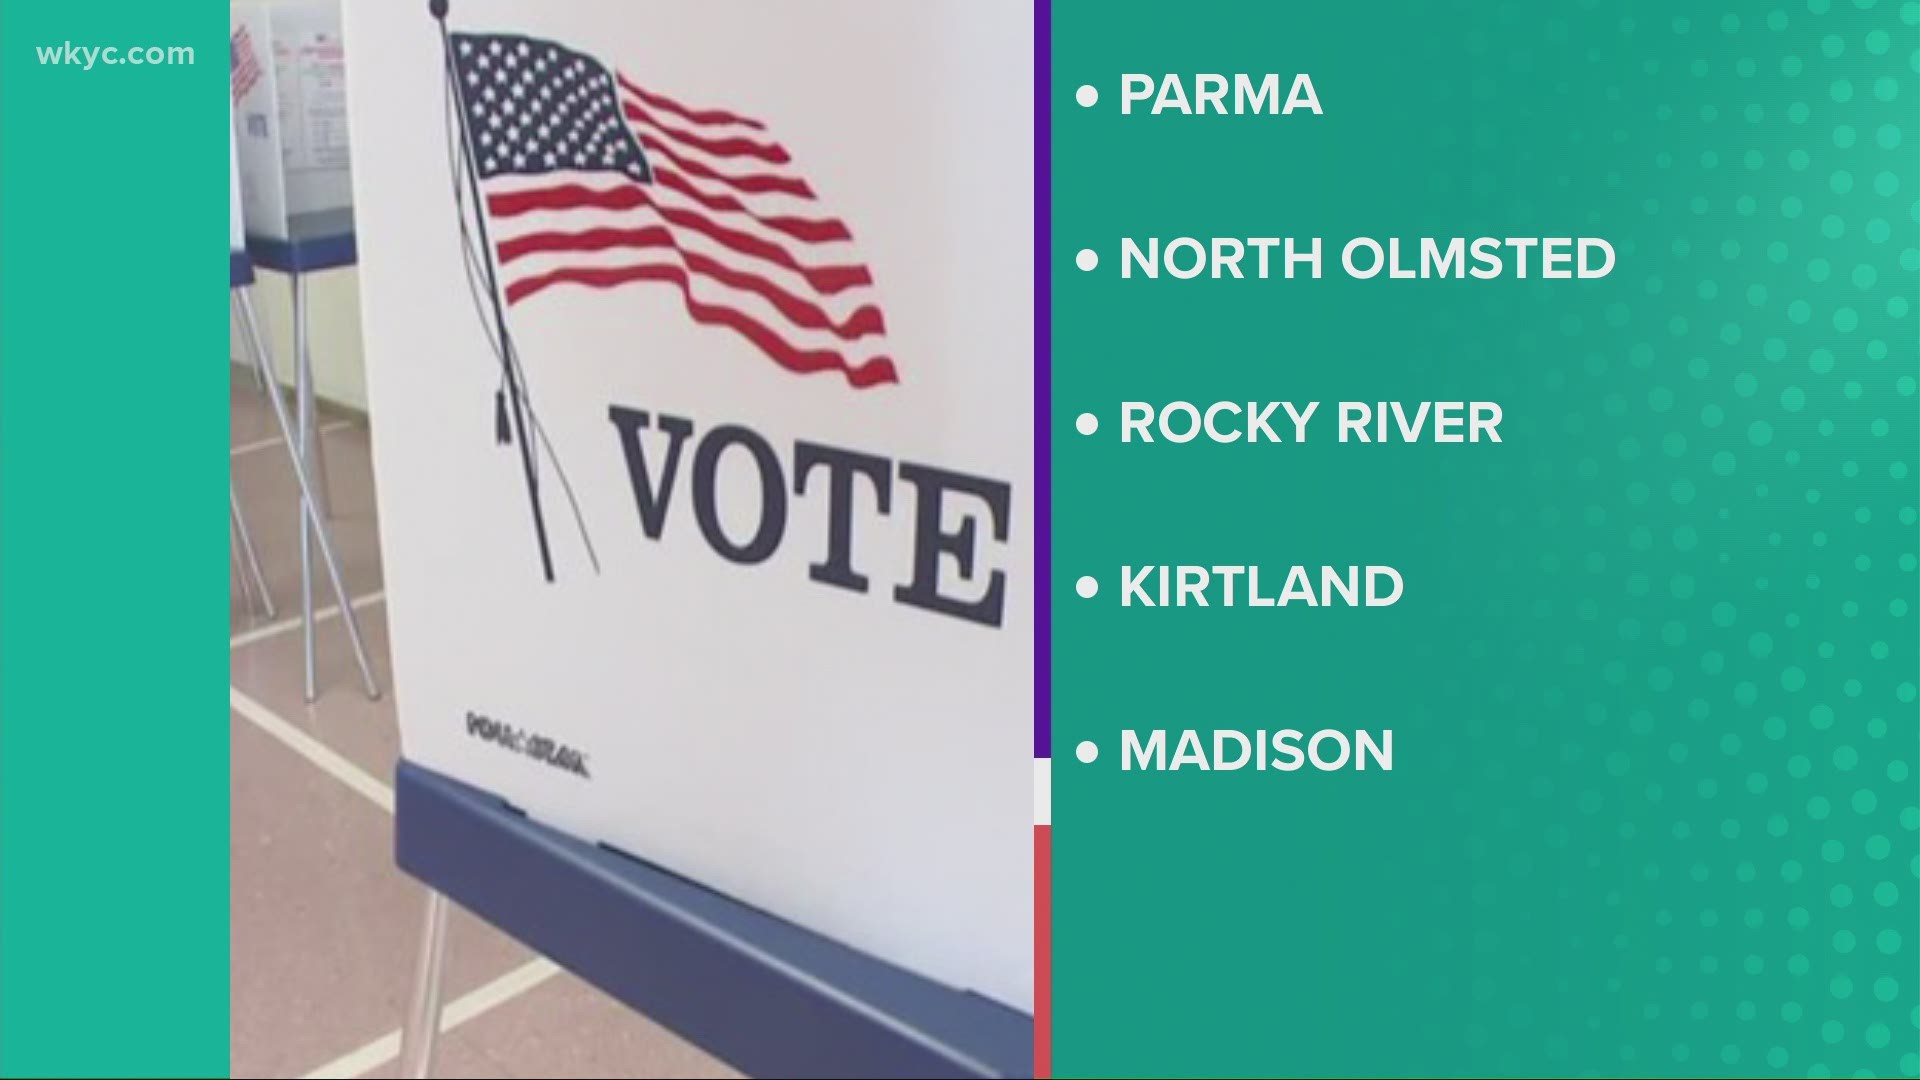 The polls are open in Ohio from 6:30 a.m. until 7:30 p.m. as the state hosts in-person voting for the May 4 primary election, which includes multiple school levies.